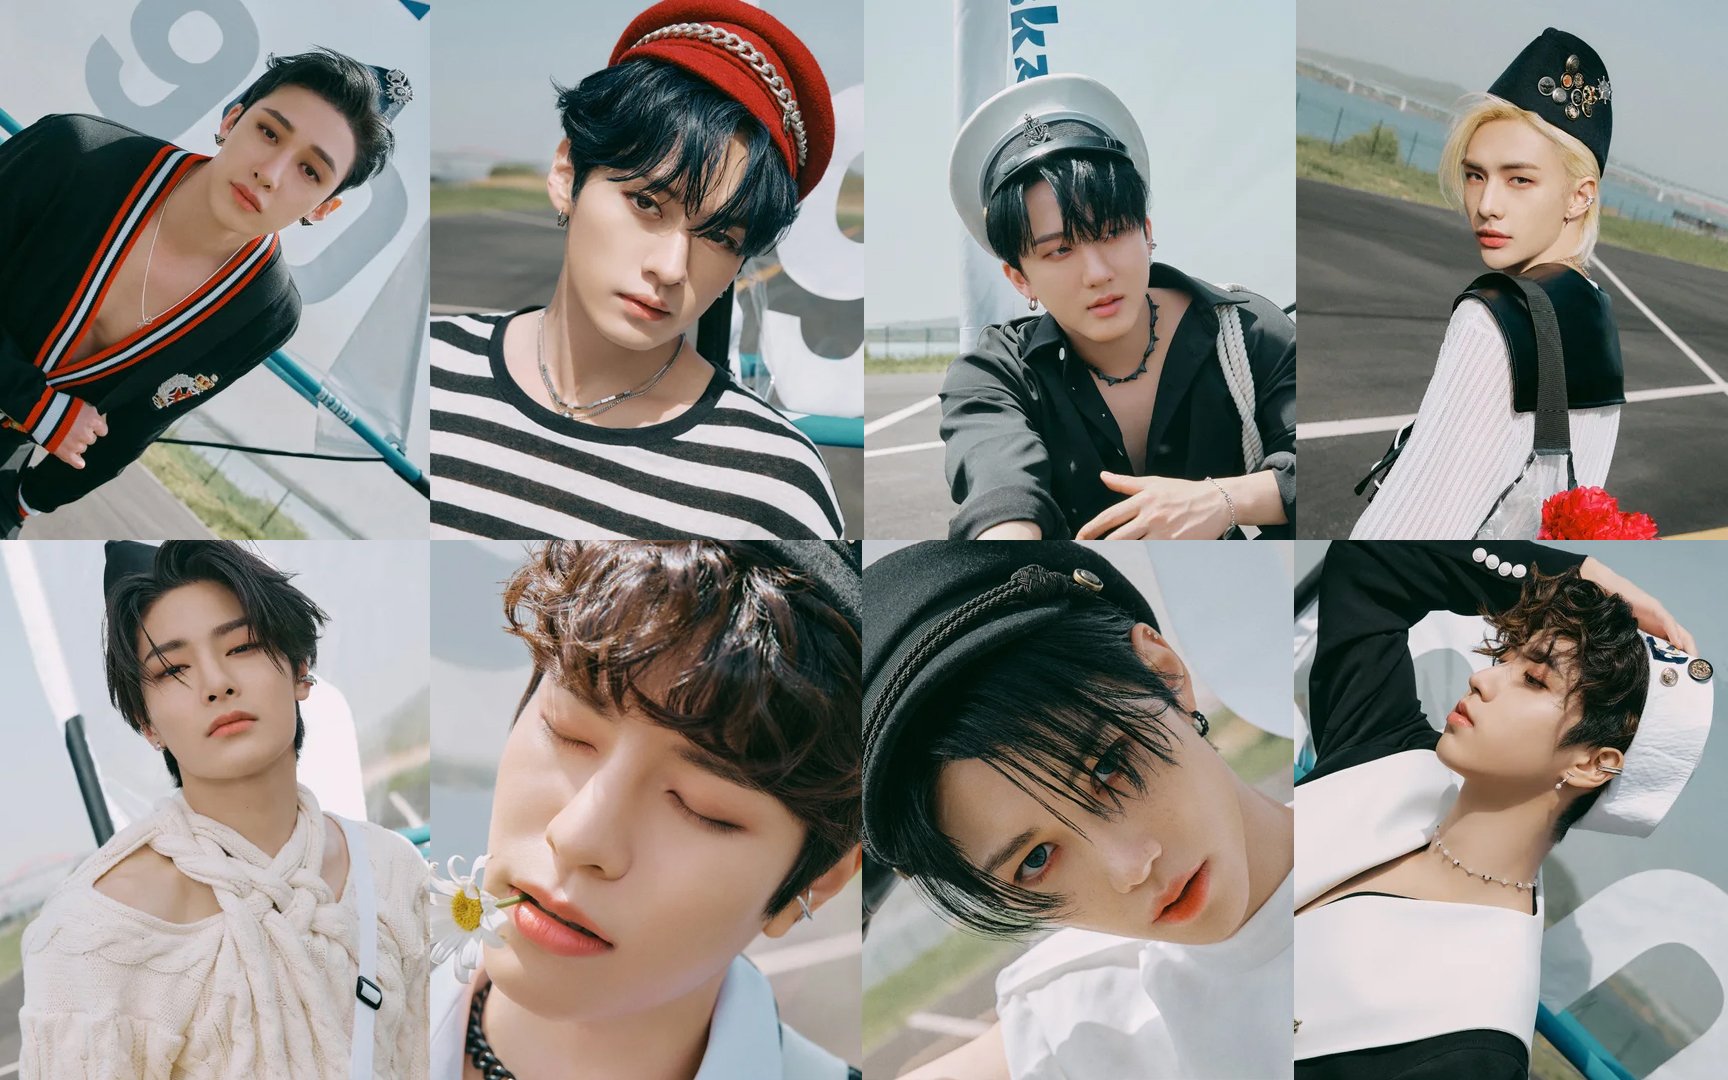 Stray Kids Go Sailing In The New Individual Teaser Photo For The 7th Mini Album 'MAXIDENT'